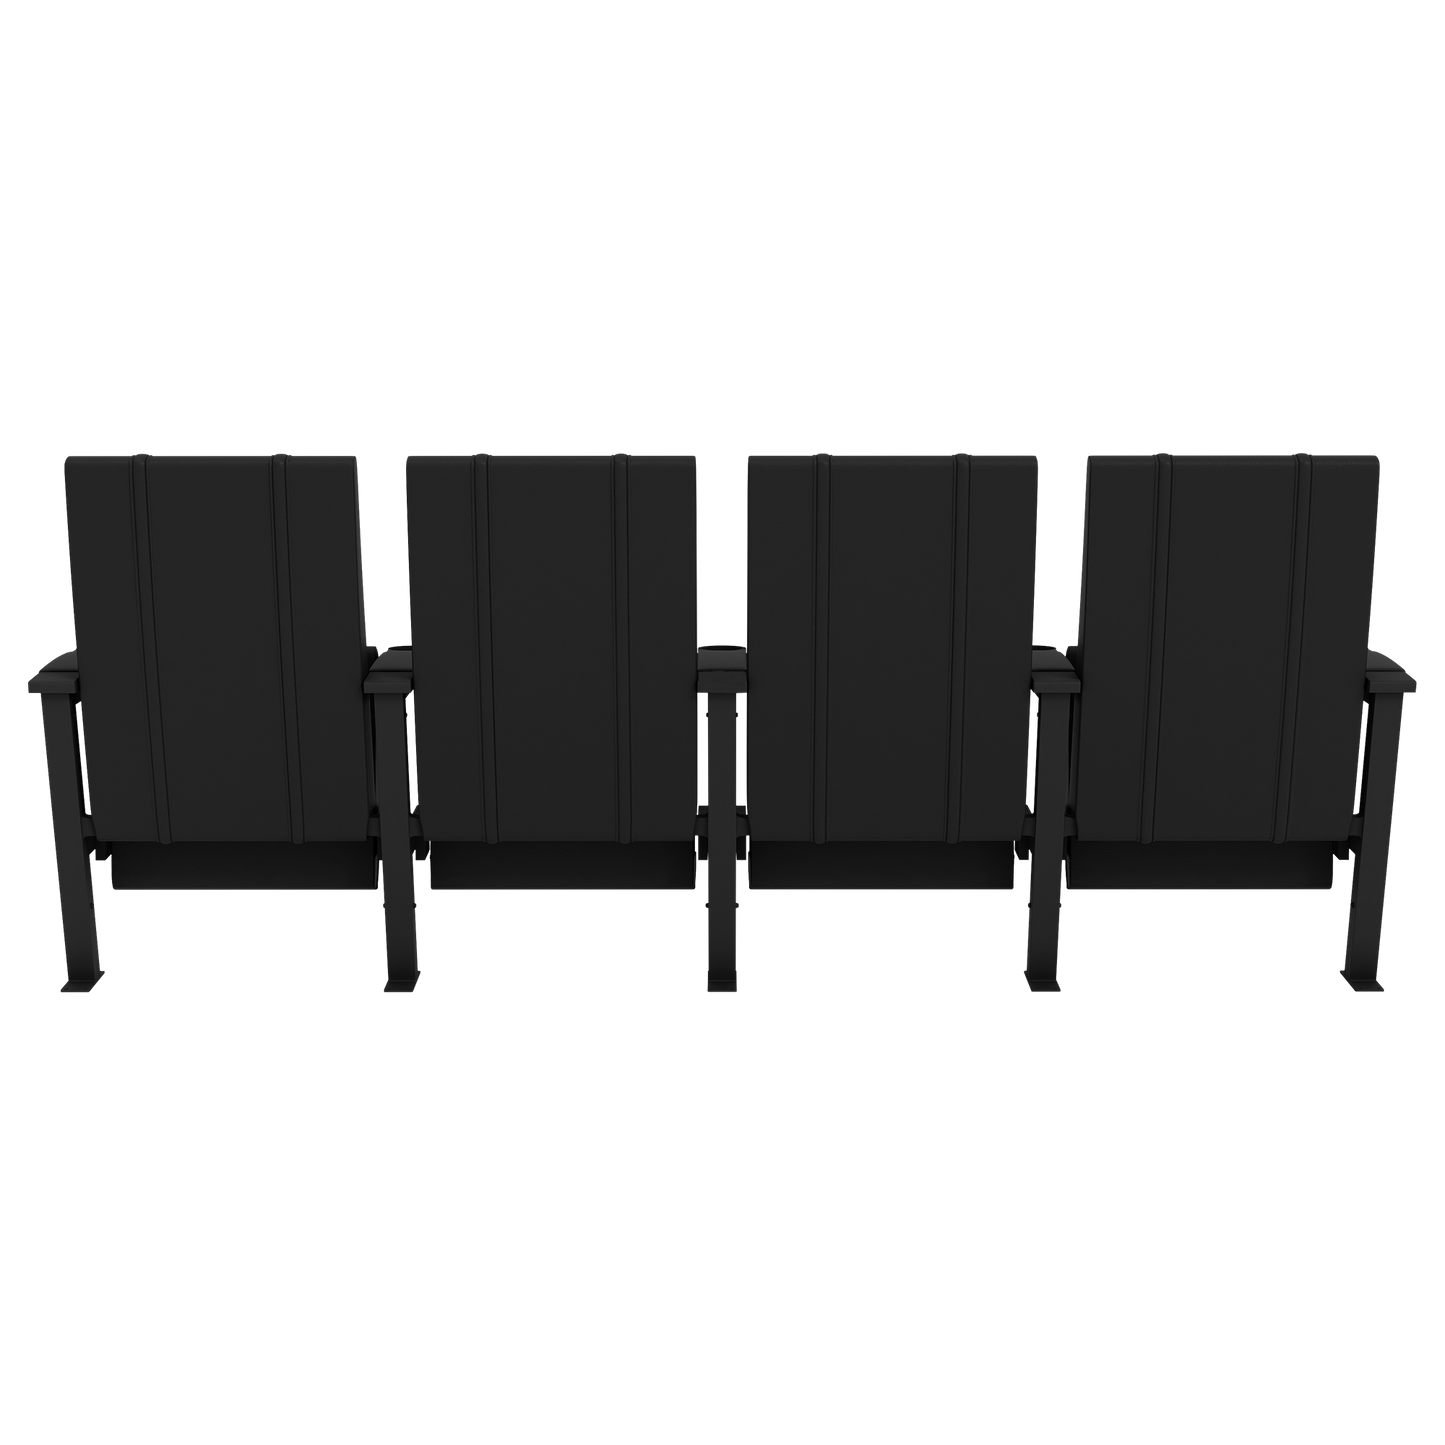 SuiteMax 3.5 VIP Seats with Pittsburgh Steelers Primary Logo